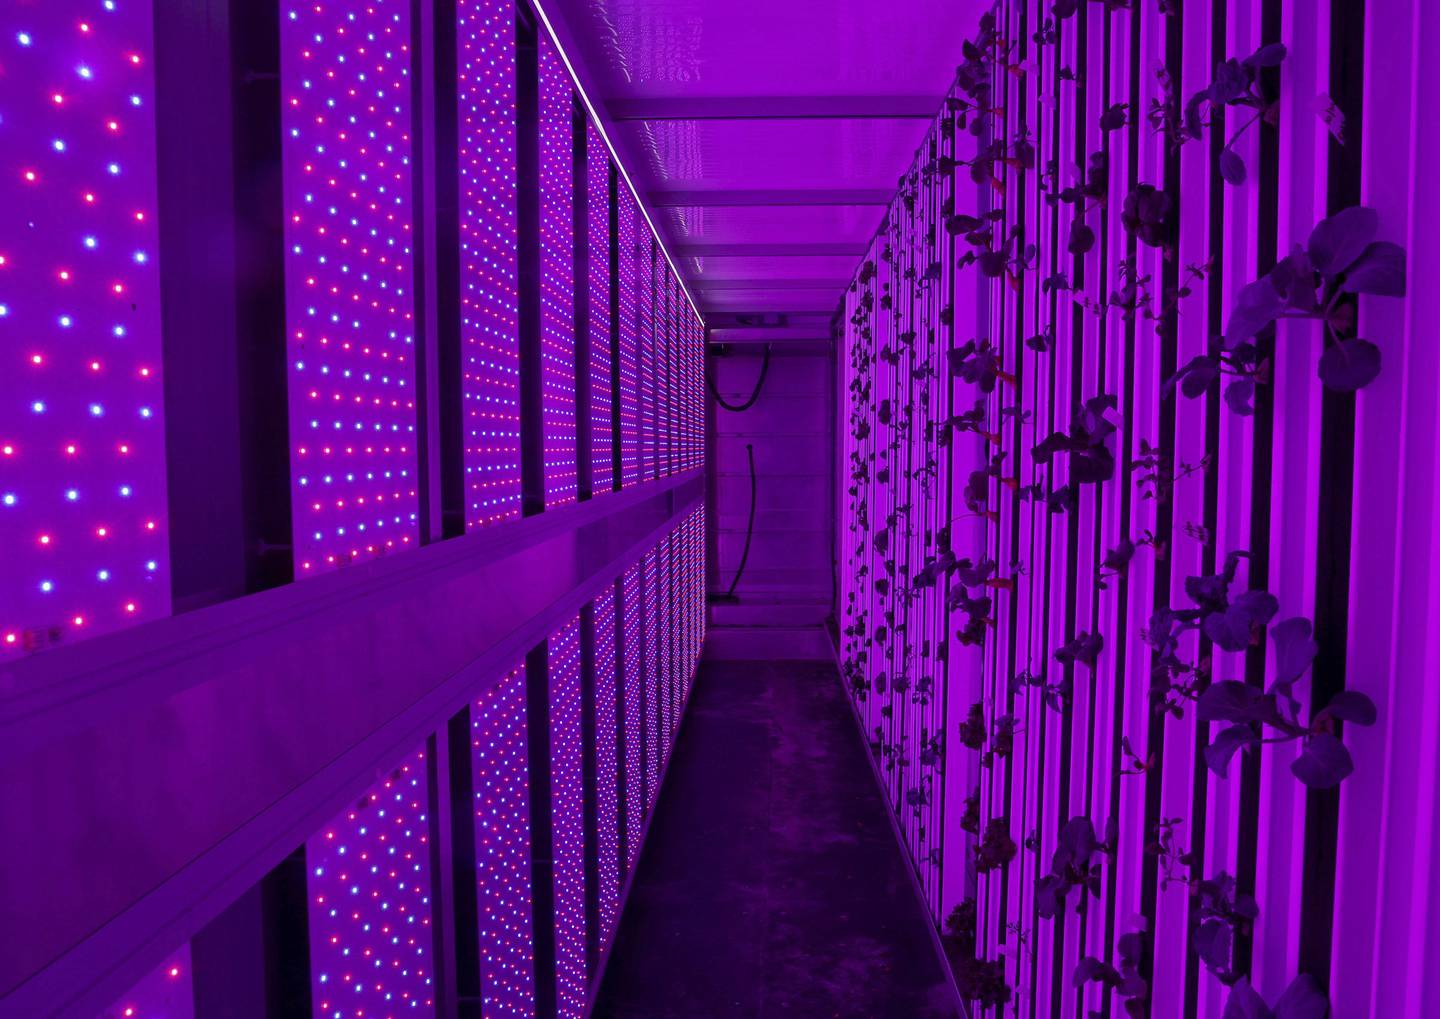 120 LED boards that emit only select wavelengths of red and blue light, which plants are able to absorb best for photosynthesis. The red light helps the plant grow dense and healthy leaves.